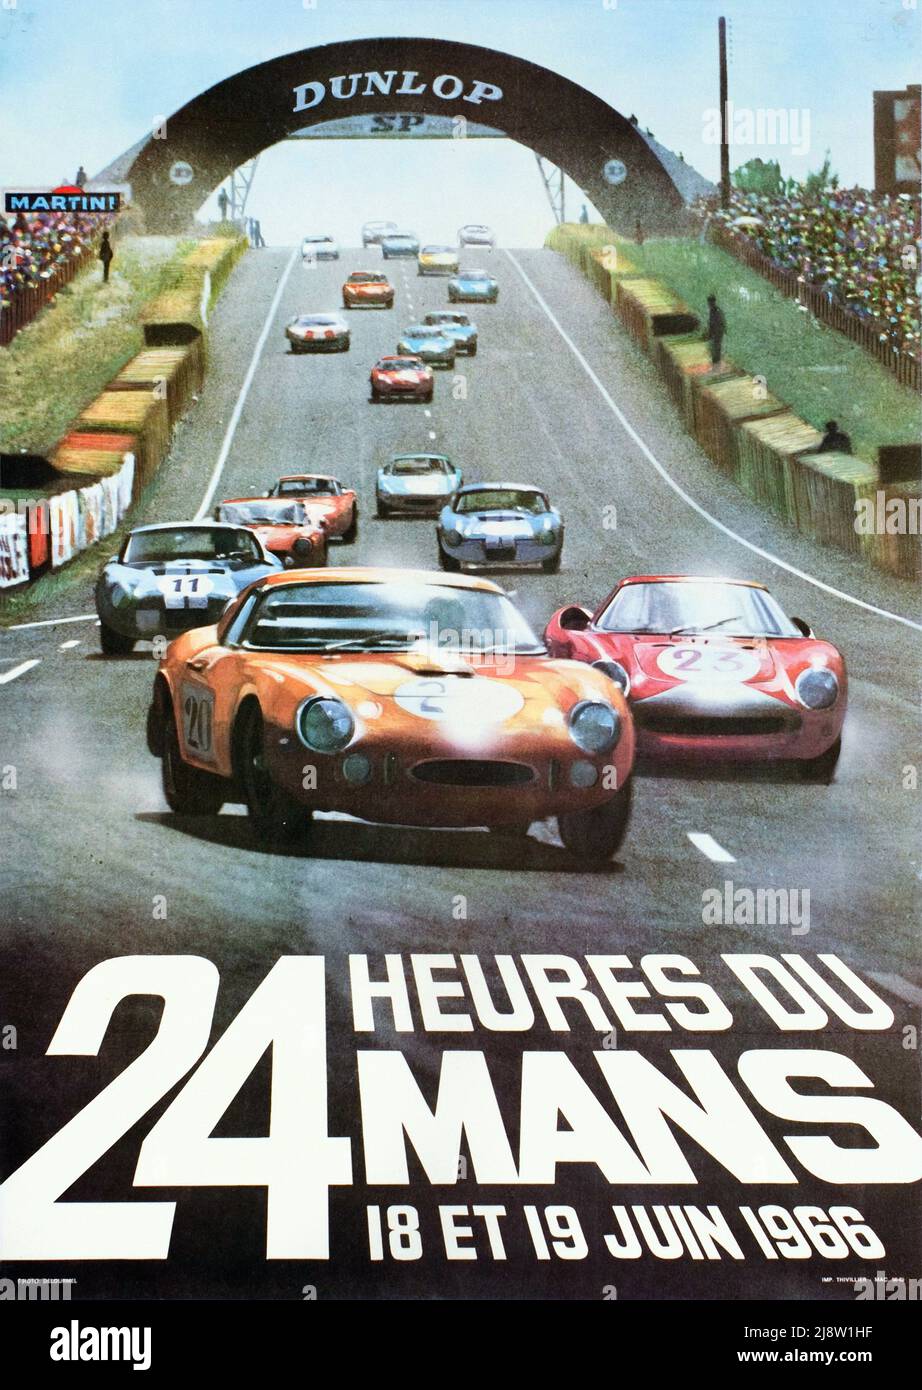 Vintage 1960s Race Poster - 24 Hours of Le Mans -1966 Stock Photo